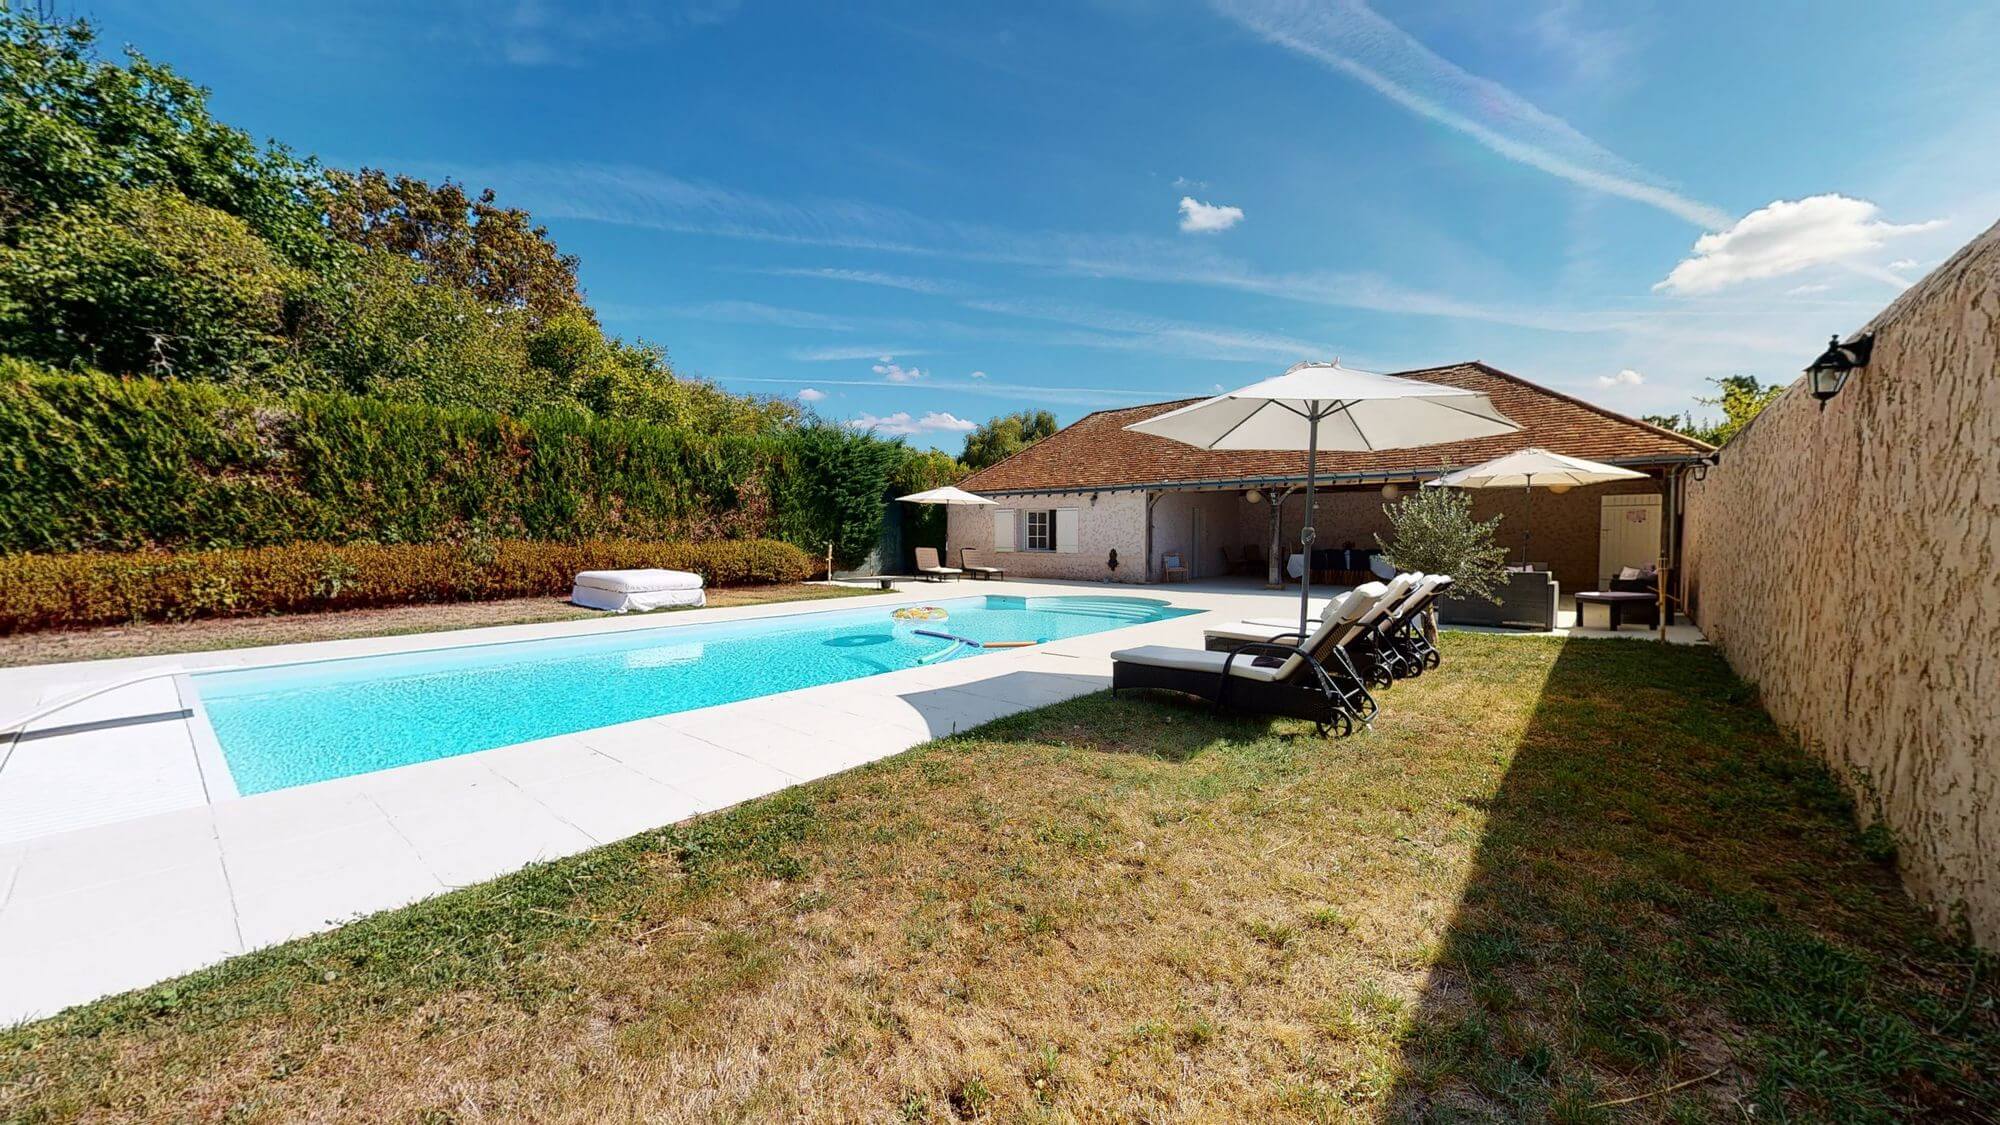 Bed and Breakfast in La Flèche, luxury rooms, swimming pool, jacuzzi and sauna, 10 minutes from the Zoo de la Flèche, BnB